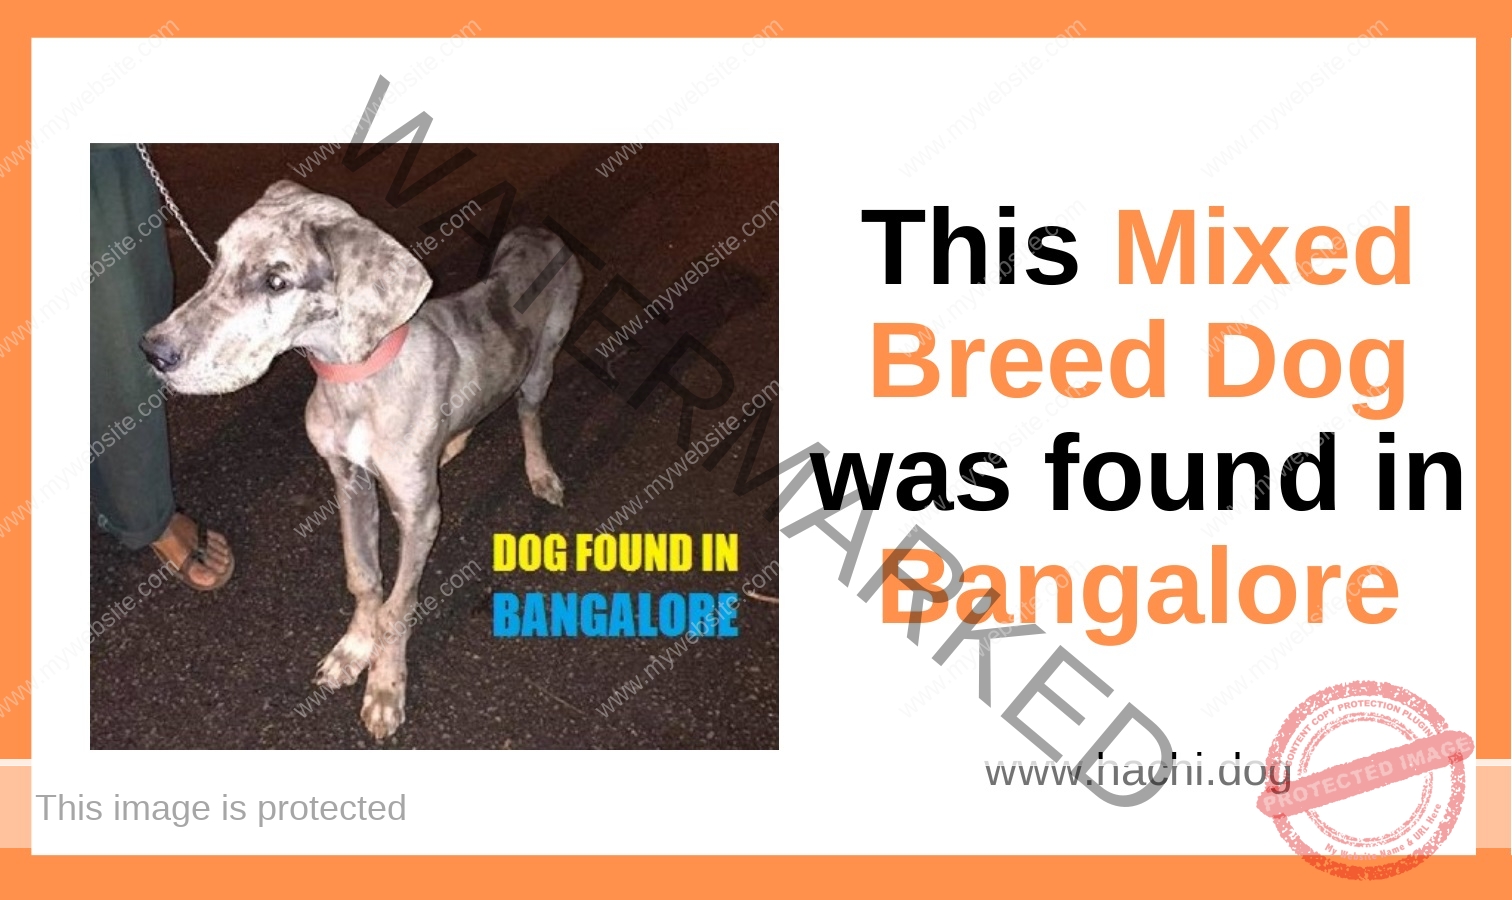 A Mixed Breed Dog Found in Bangalore